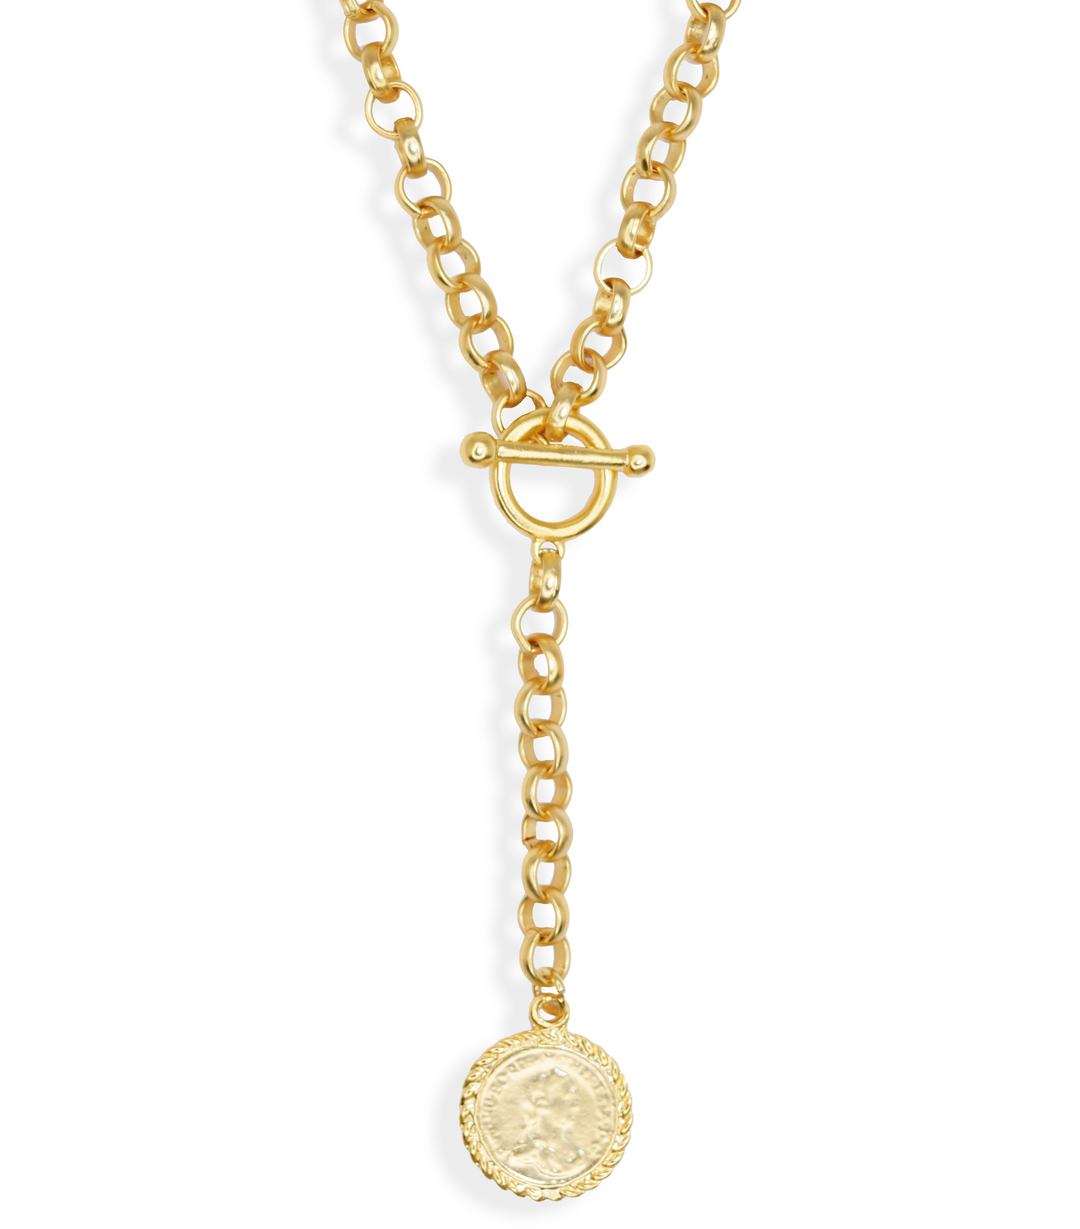 Y link necklace with old world coin pendant - Karine Sultan